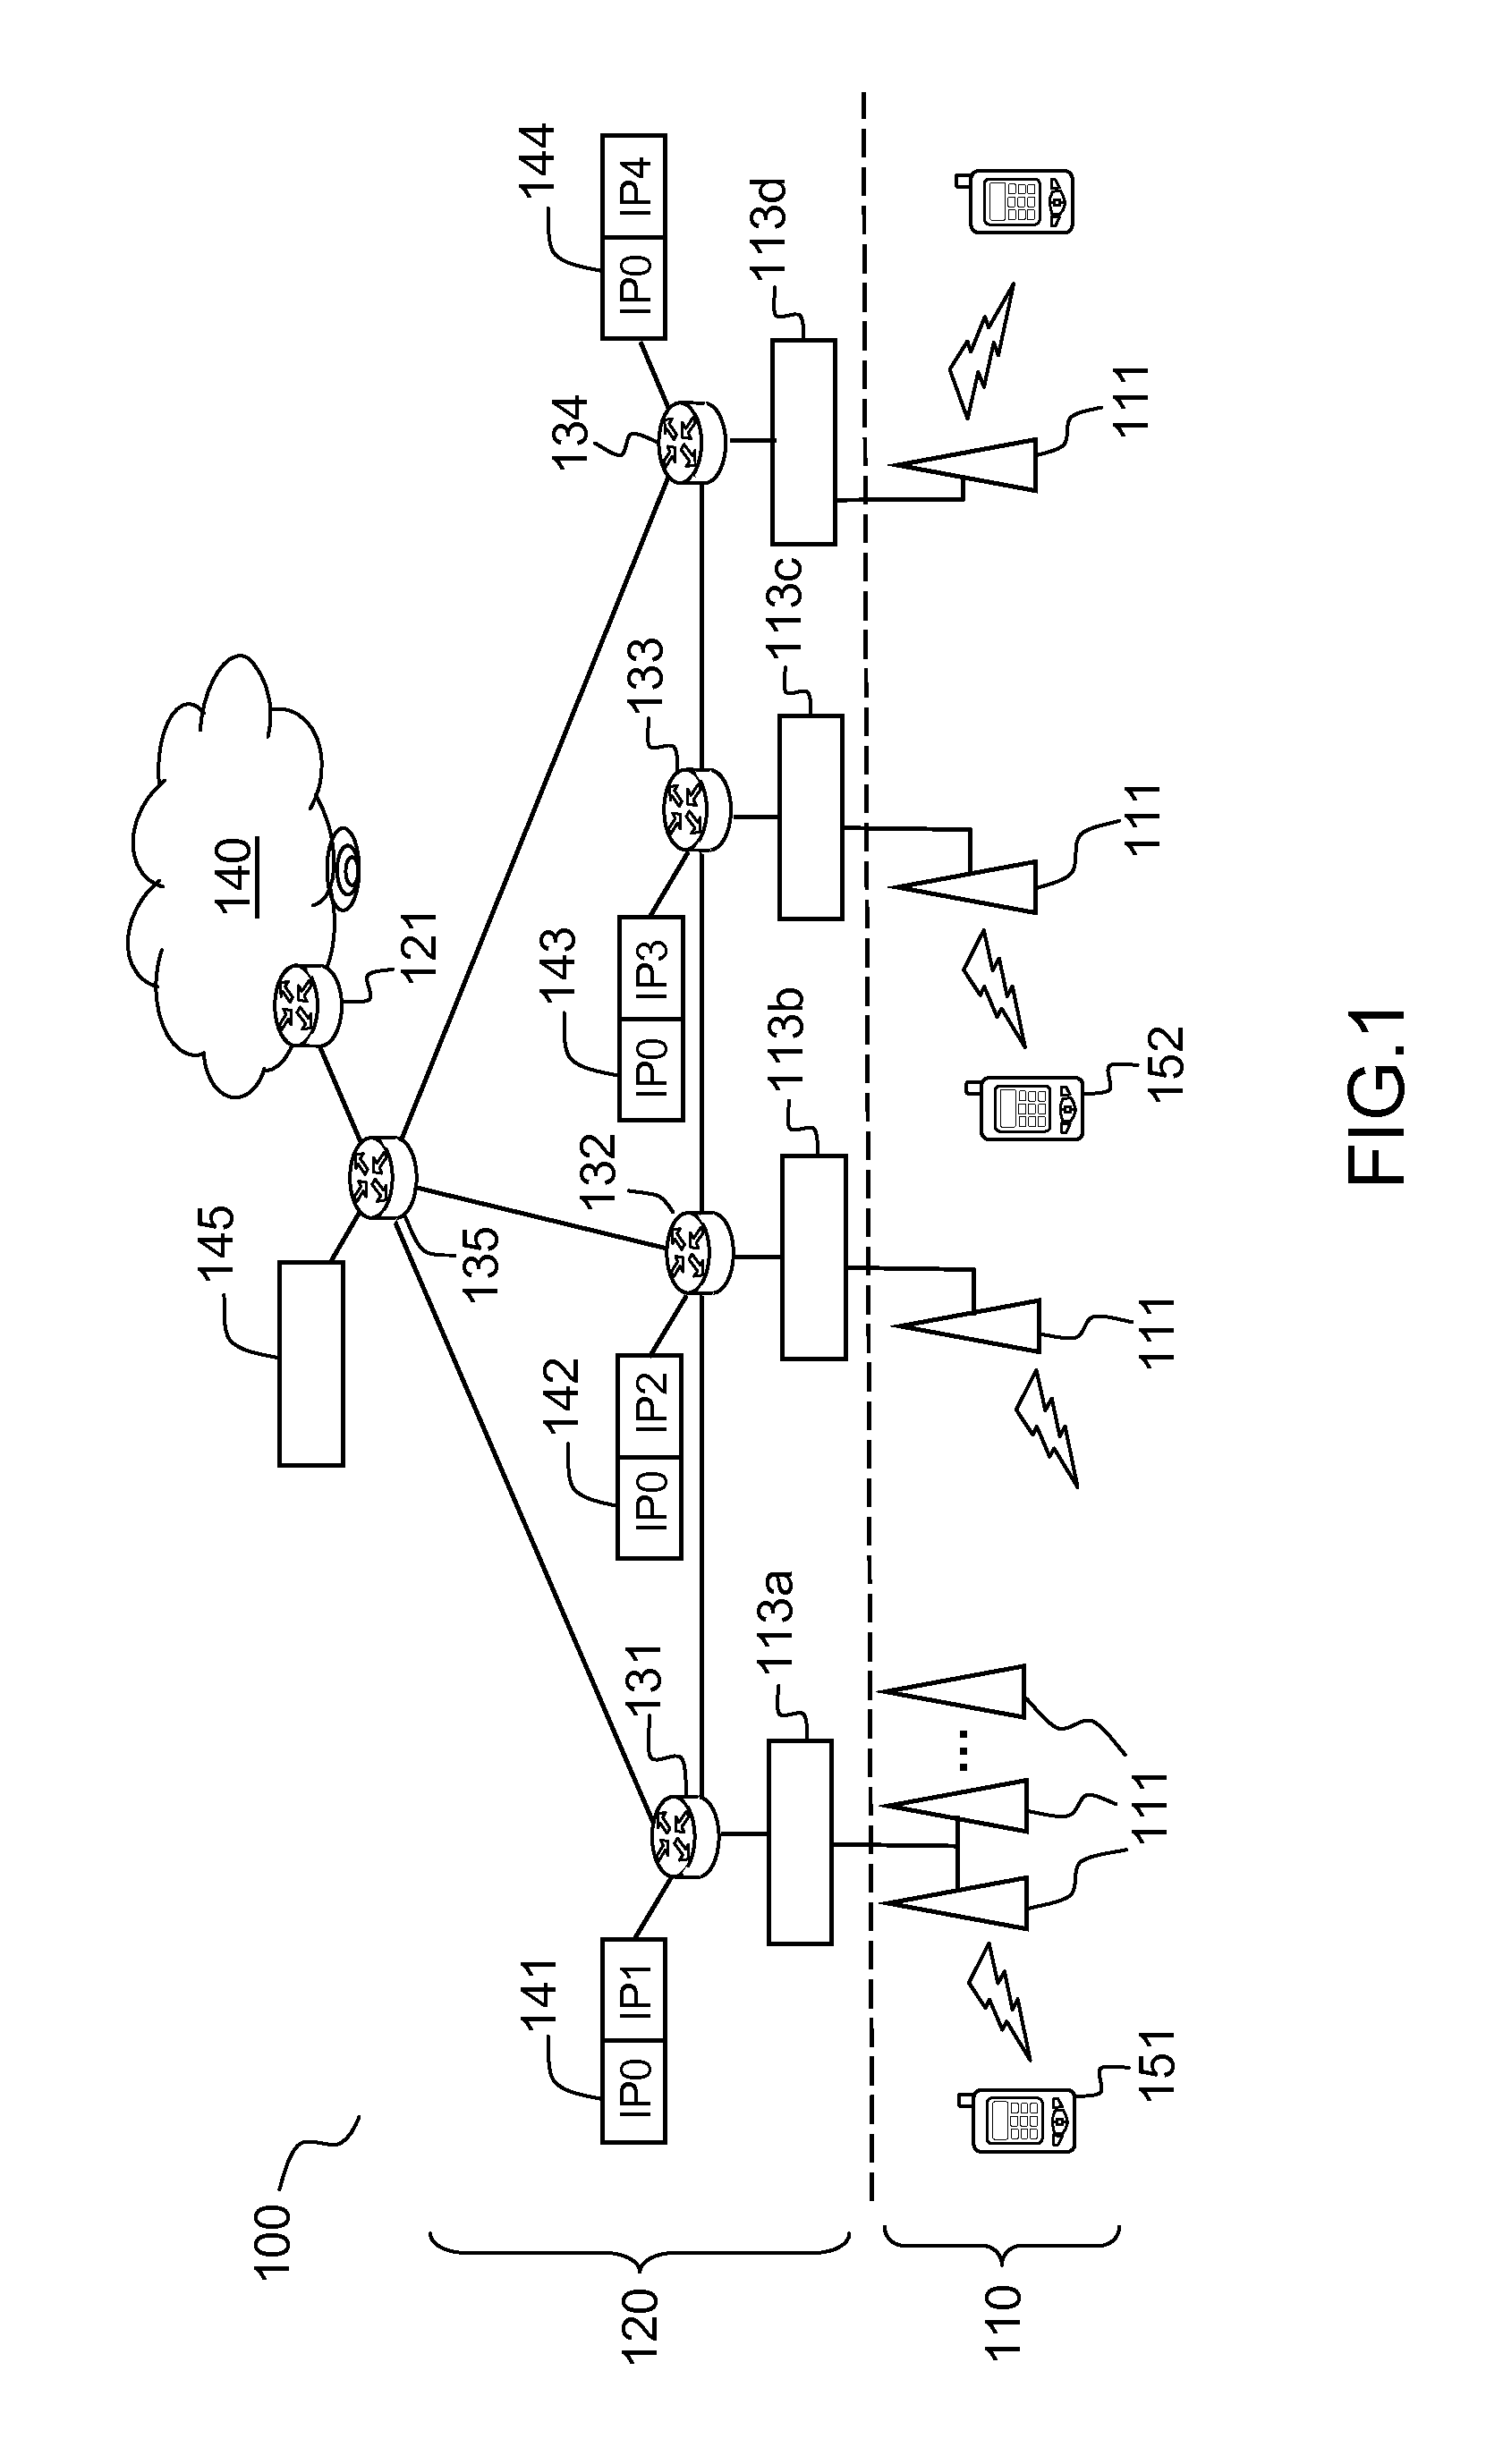 Method for Enhancing the Reliability of the Continuity of the Communications Operated from a 4G Mobile Terminal Linked to an IP Interconnection Network